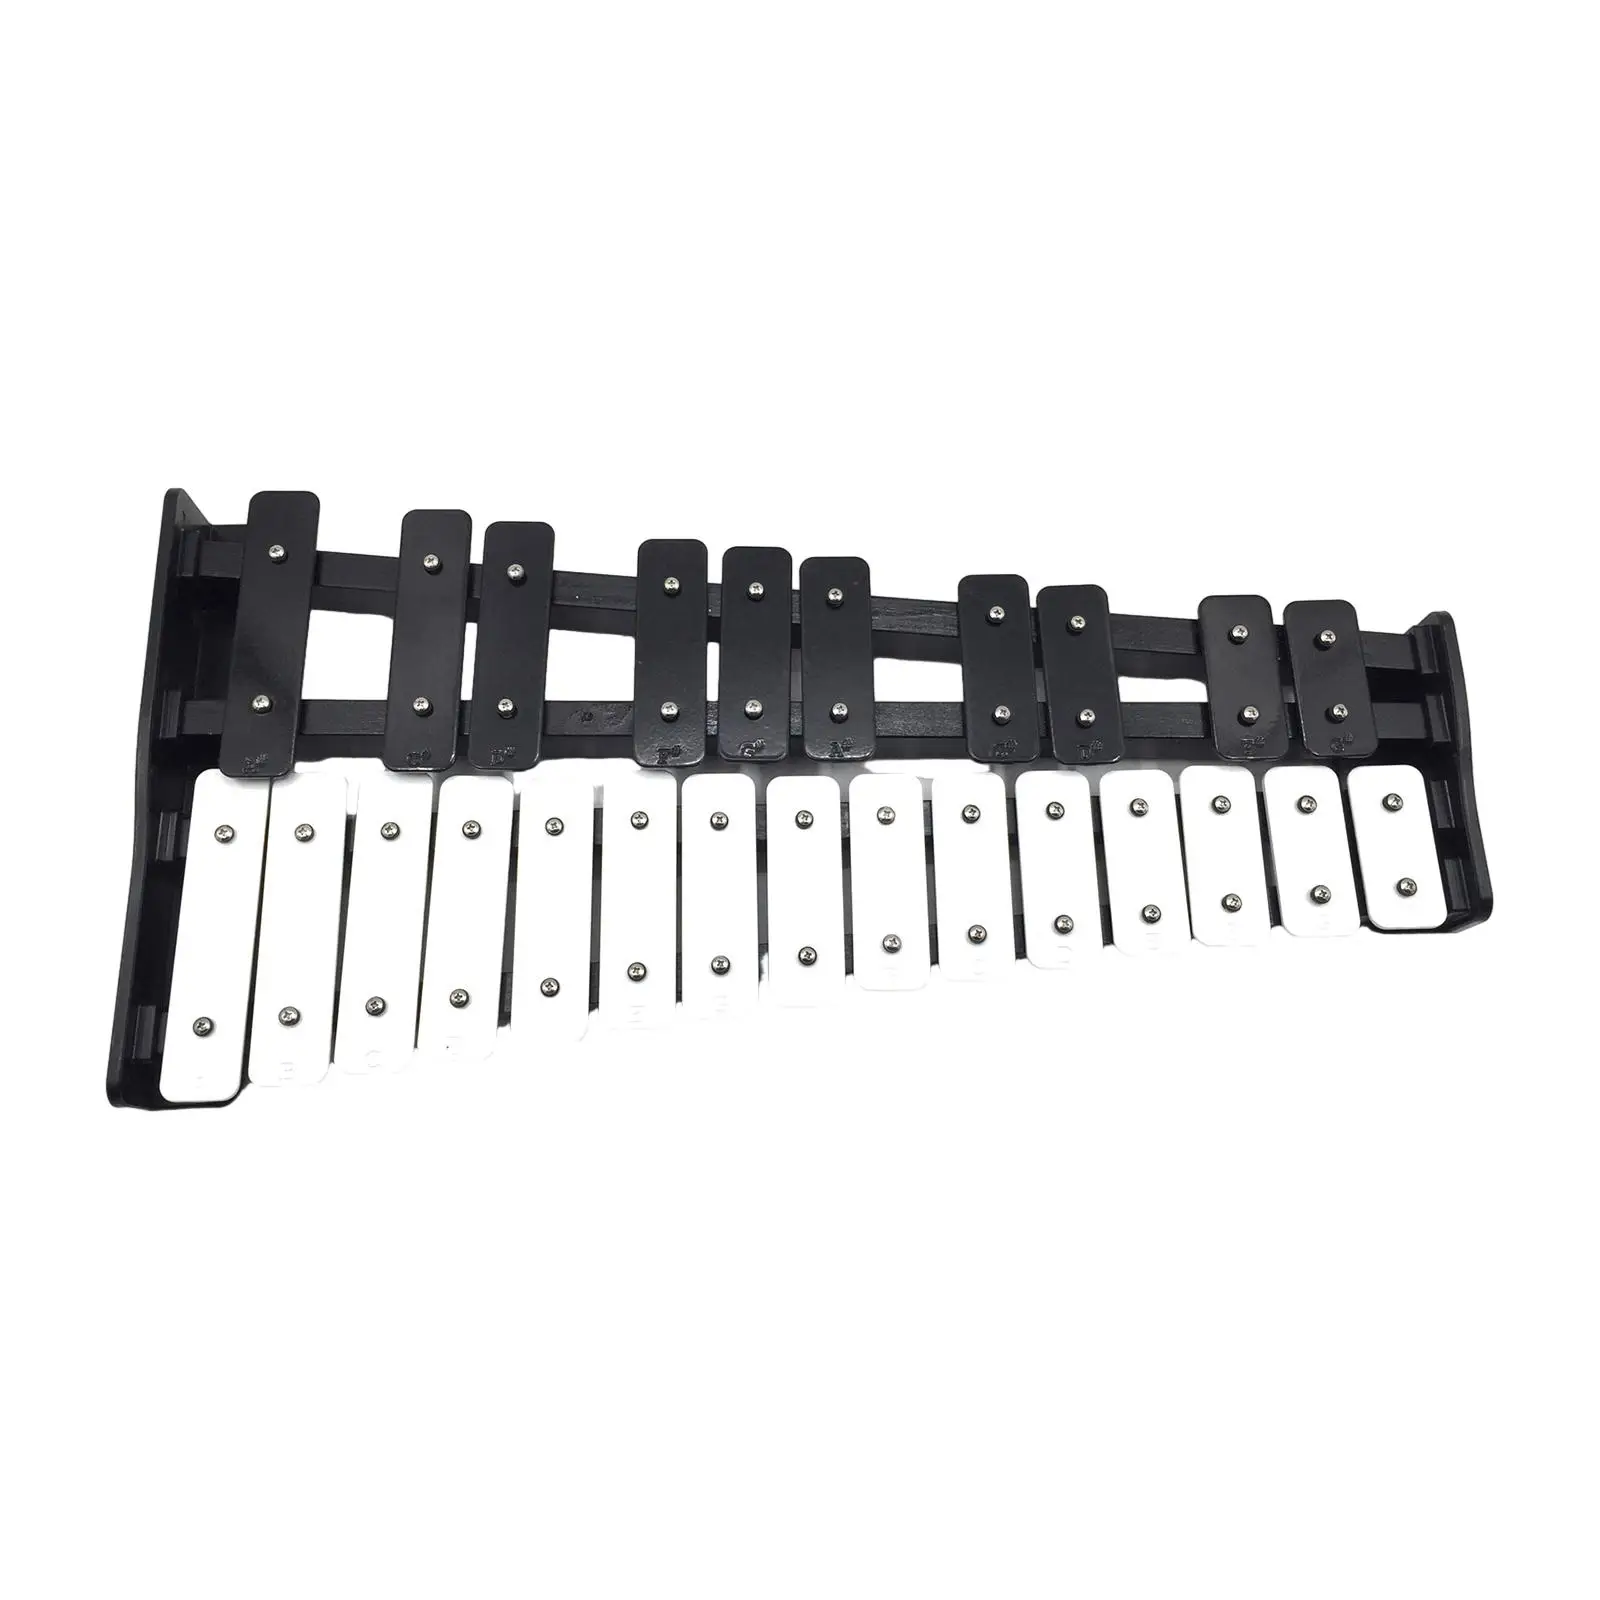 25 Note Glockenspiel Portable Professional for Kids Adults Xylophone Musical Educational Tuned Glockenspiel Musical Instrument